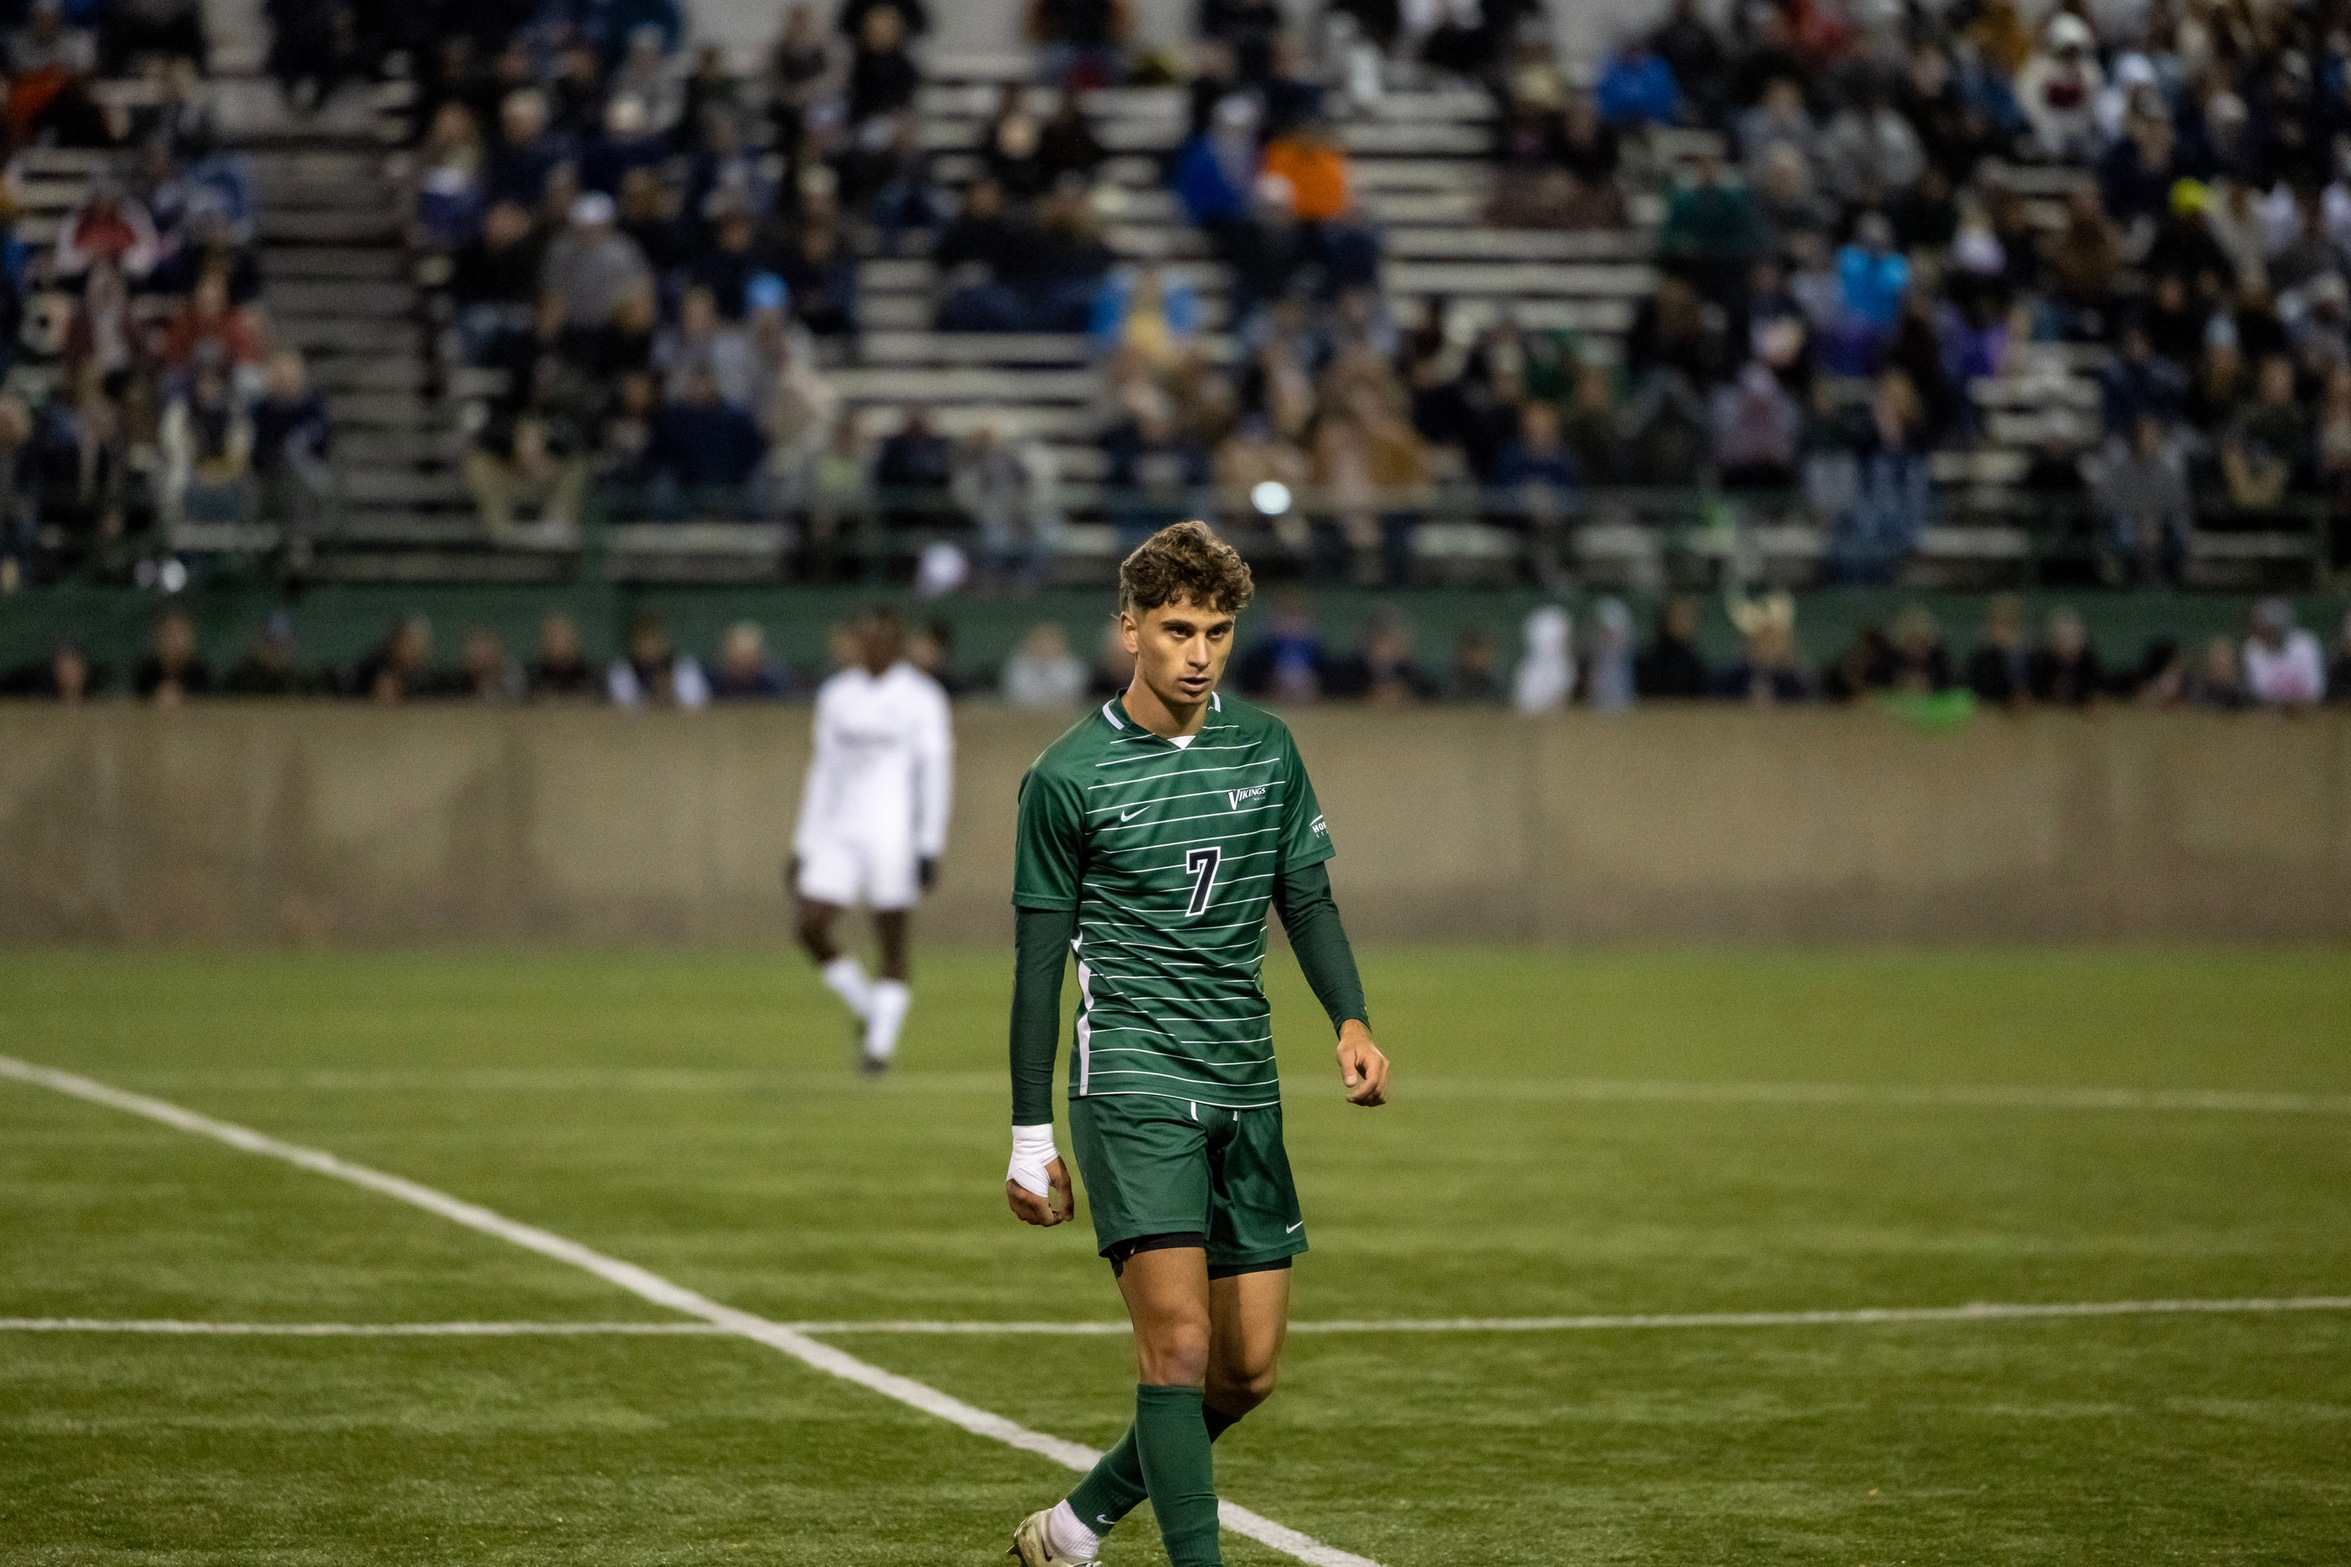 Cleveland State Men's Soccer Drops Final Non-League Game at Michigan, 3-2